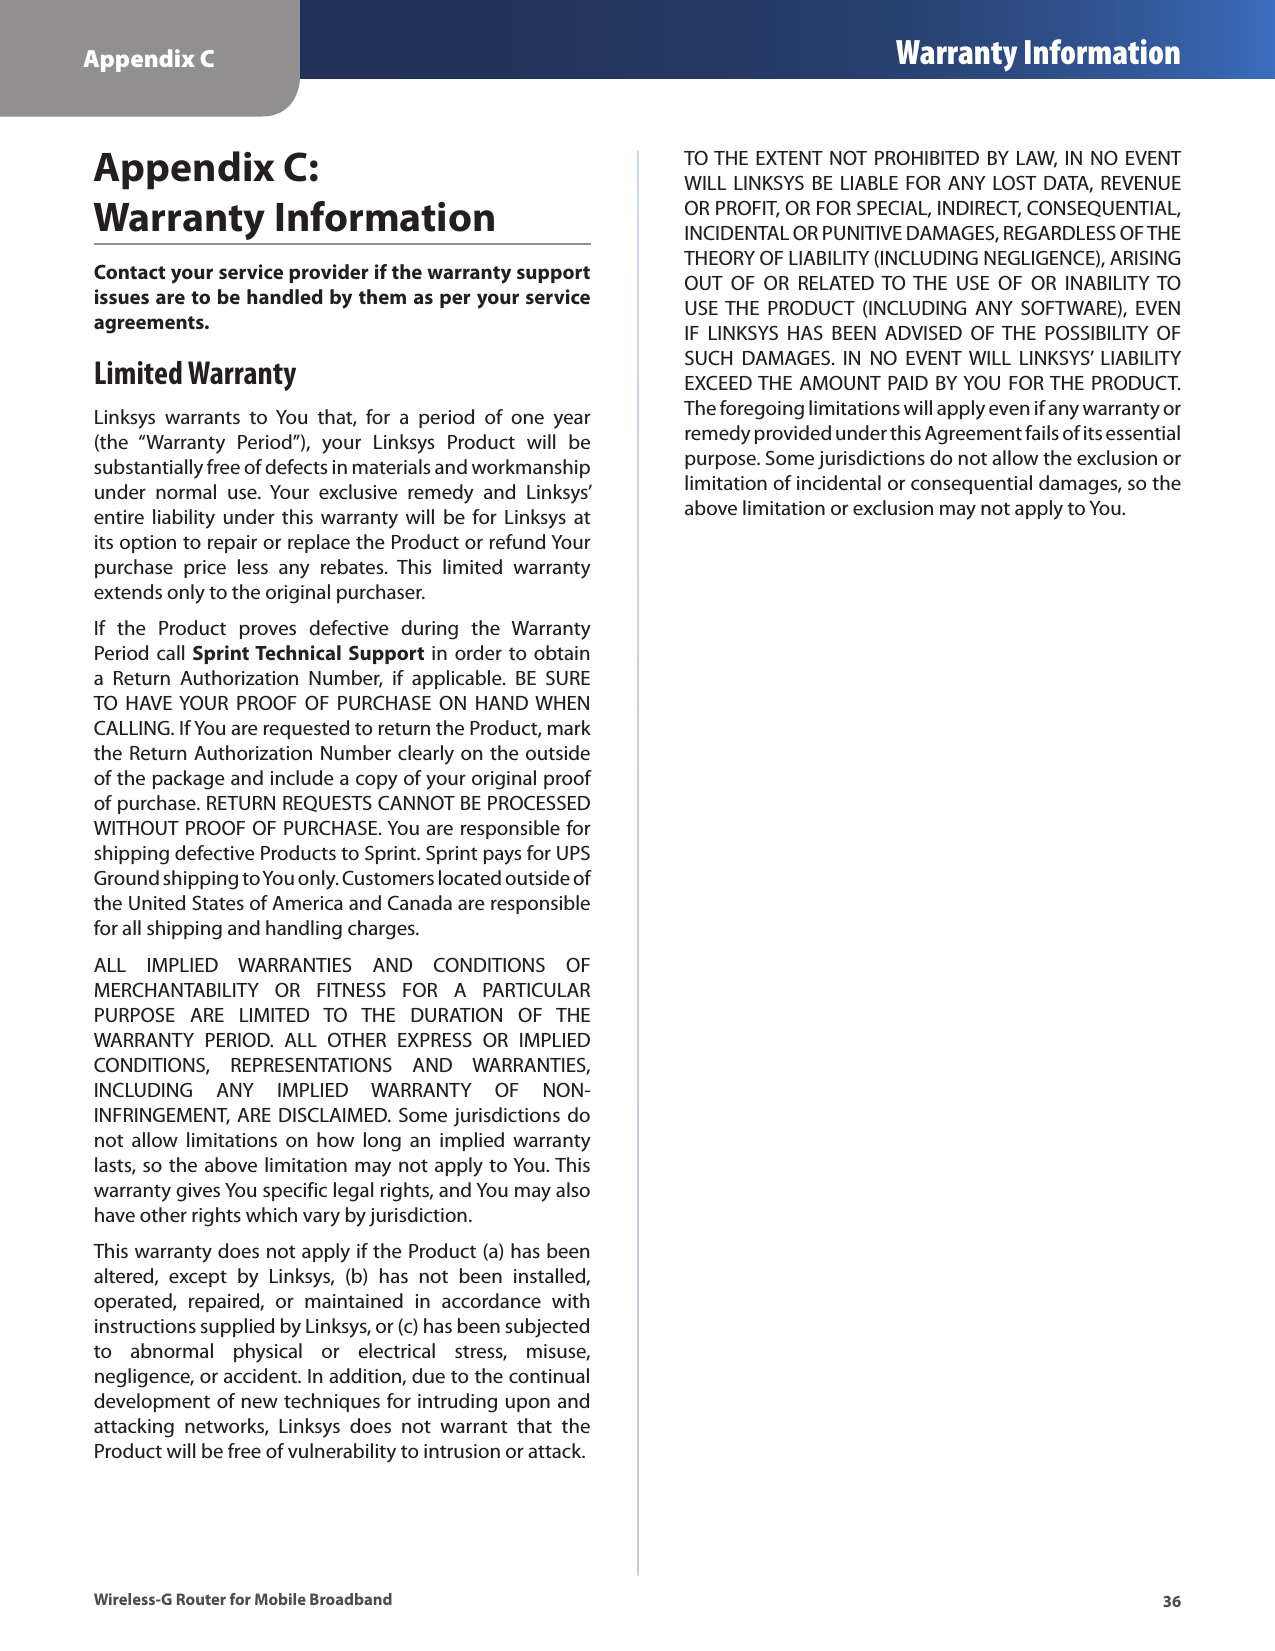 Appendix C Warranty Information36Wireless-G Router for Mobile BroadbandContact your service provider if the warranty support issues are to be handled by them as per your service agreements.Limited WarrantyLinksys  warrants  to  You  that,  for  a  period  of  one  year (the  “Warranty  Period”),  your  Linksys  Product  will  be substantially free of defects in materials and workmanship under  normal  use.  Your  exclusive  remedy  and  Linksys’ entire liability  under  this  warranty  will be  for  Linksys at its option to repair or replace the Product or refund Your purchase  price  less  any  rebates.  This  limited  warranty extends only to the original purchaser. If  the  Product  proves  defective  during  the  Warranty Period call  Sprint Technical  Support  in order to obtain a  Return  Authorization  Number,  if  applicable.  BE  SURE TO  HAVE YOUR  PROOF  OF  PURCHASE  ON  HAND WHEN CALLING. If You are requested to return the Product, mark the Return Authorization Number clearly on the outside of the package and include a copy of your original proof of purchase. RETURN REQUESTS CANNOT BE PROCESSED WITHOUT PROOF OF PURCHASE. You are responsible for shipping defective Products to Sprint. Sprint pays for UPS Ground shipping to You only. Customers located outside of the United States of America and Canada are responsible for all shipping and handling charges.ALL  IMPLIED  WARRANTIES  AND  CONDITIONS  OF MERCHANTABILITY  OR  FITNESS  FOR  A  PARTICULAR PURPOSE  ARE  LIMITED  TO  THE  DURATION  OF  THE WARRANTY  PERIOD.  ALL  OTHER  EXPRESS  OR  IMPLIED CONDITIONS,  REPRESENTATIONS  AND  WARRANTIES, INCLUDING  ANY  IMPLIED  WARRANTY  OF  NON-INFRINGEMENT,  ARE  DISCLAIMED. Some jurisdictions do not  allow  limitations  on  how  long  an  implied  warranty lasts, so the above limitation may not apply to You. This warranty gives You specific legal rights, and You may also have other rights which vary by jurisdiction.This warranty does not apply if the Product (a) has been altered,  except  by  Linksys,  (b)  has  not  been  installed, operated,  repaired,  or  maintained  in  accordance  with instructions supplied by Linksys, or (c) has been subjected to  abnormal  physical  or  electrical  stress,  misuse, negligence, or accident. In addition, due to the continual development of new techniques for intruding upon and attacking  networks,  Linksys  does  not  warrant  that  the Product will be free of vulnerability to intrusion or attack.TO THE EXTENT NOT PROHIBITED BY LAW, IN NO EVENT WILL LINKSYS BE LIABLE FOR ANY LOST DATA, REVENUE OR PROFIT, OR FOR SPECIAL, INDIRECT, CONSEQUENTIAL, INCIDENTAL OR PUNITIVE DAMAGES, REGARDLESS OF THE THEORY OF LIABILITY (INCLUDING NEGLIGENCE), ARISING OUT  OF  OR  RELATED  TO  THE  USE  OF  OR  INABILITY  TO USE THE  PRODUCT  (INCLUDING  ANY  SOFTWARE),  EVEN IF  LINKSYS  HAS  BEEN  ADVISED  OF THE  POSSIBILITY  OF SUCH  DAMAGES.  IN  NO  EVENT WILL  LINKSYS’  LIABILITY EXCEED THE AMOUNT PAID BY YOU FOR THE PRODUCT. The foregoing limitations will apply even if any warranty or remedy provided under this Agreement fails of its essential purpose. Some jurisdictions do not allow the exclusion or limitation of incidental or consequential damages, so the above limitation or exclusion may not apply to You.Appendix C:  Warranty Information